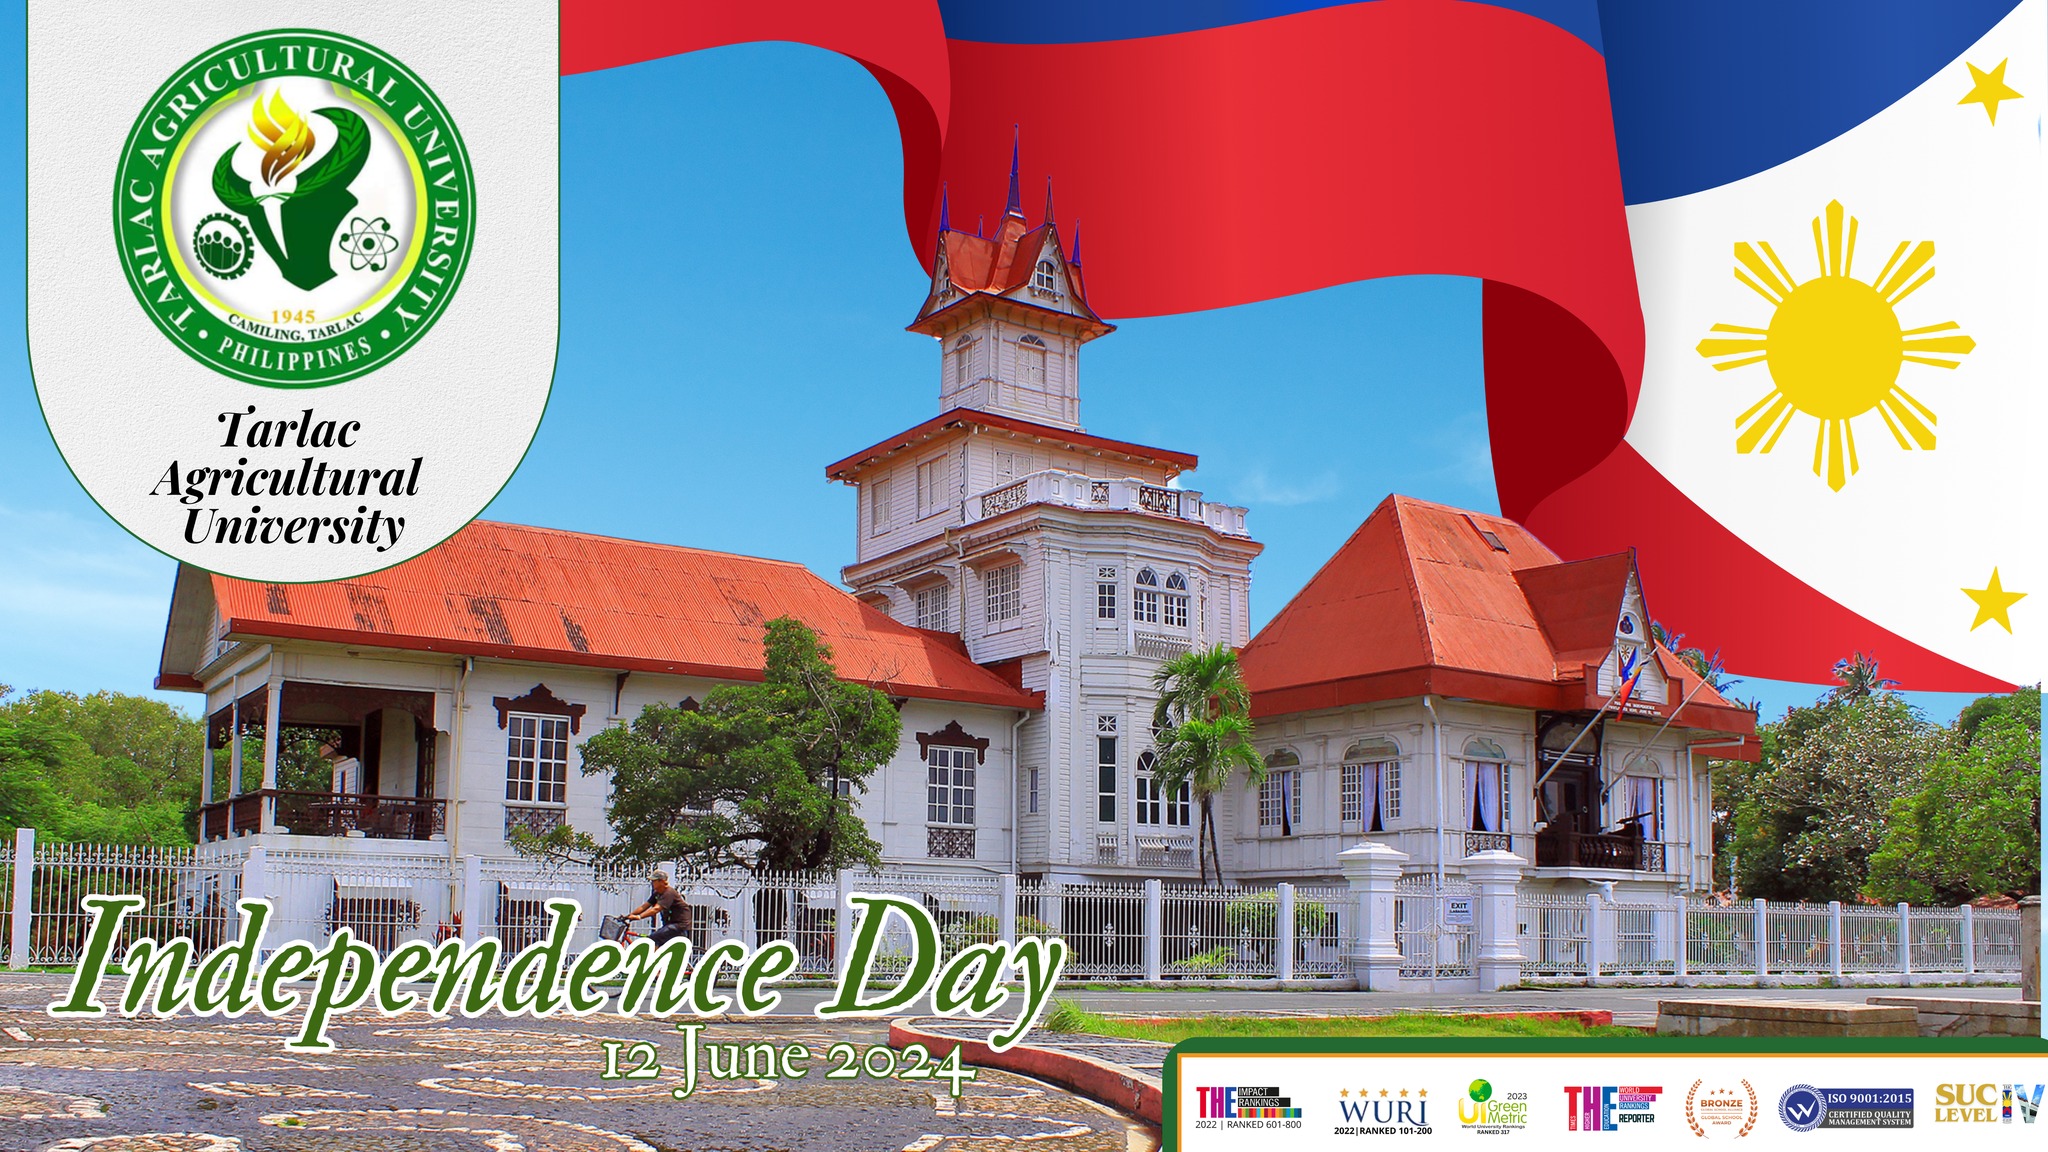 𝐔𝐍𝐈𝐕𝐄𝐑𝐒𝐈𝐓𝐘 𝐁𝐔𝐋𝐋𝐄𝐓𝐈𝐍 | Tarlac Agricultural University Independence Day 2024